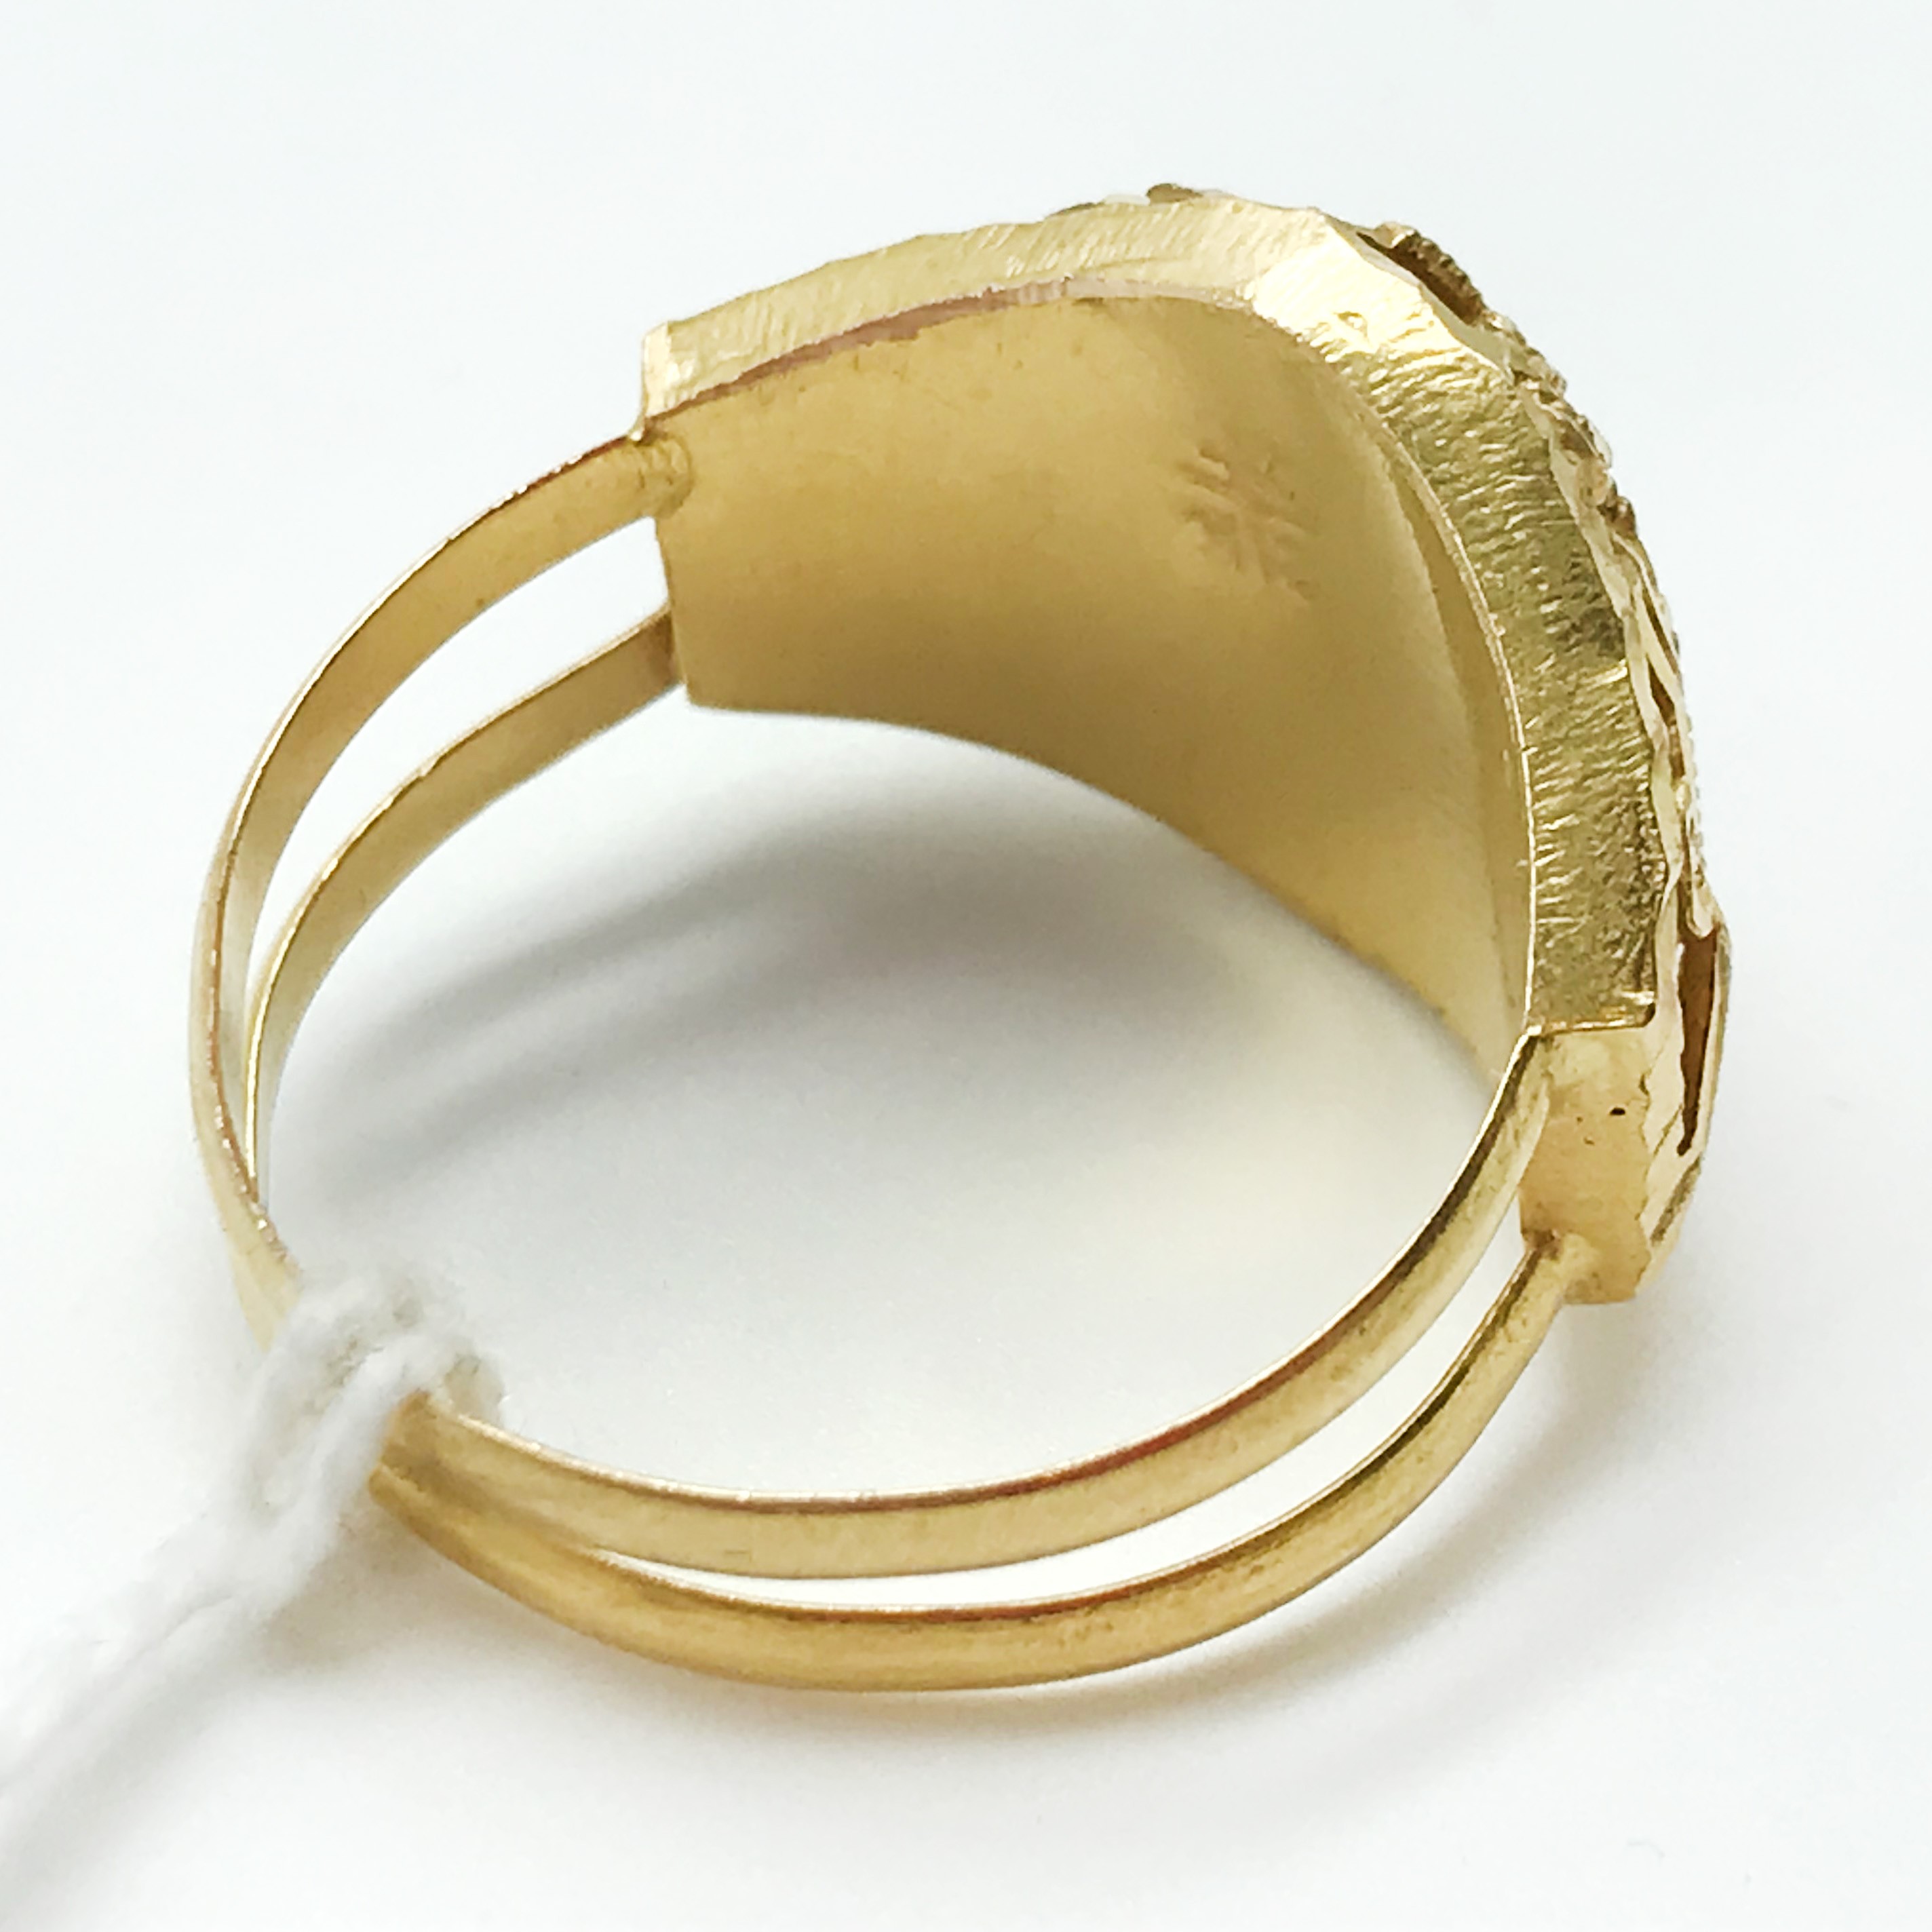 HIGH CARAT EGYPTIAN GOLD RING - Image 4 of 6